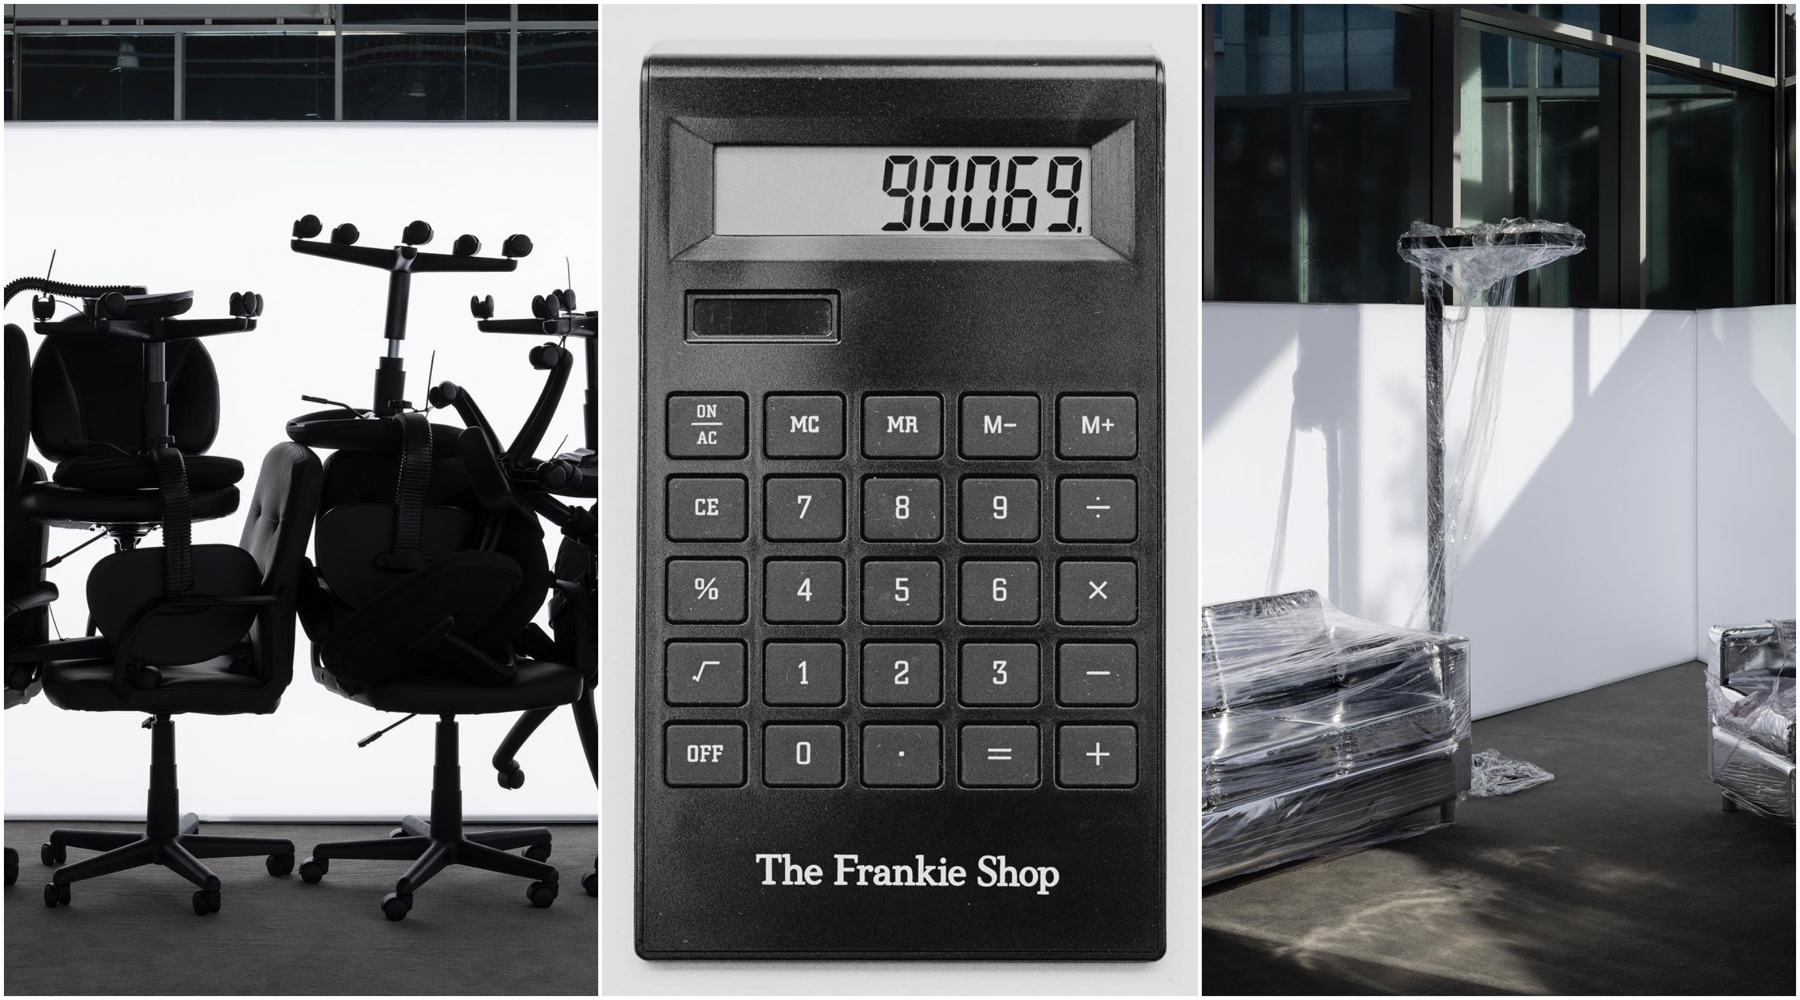 The Frankie Shop goes to Hollywood